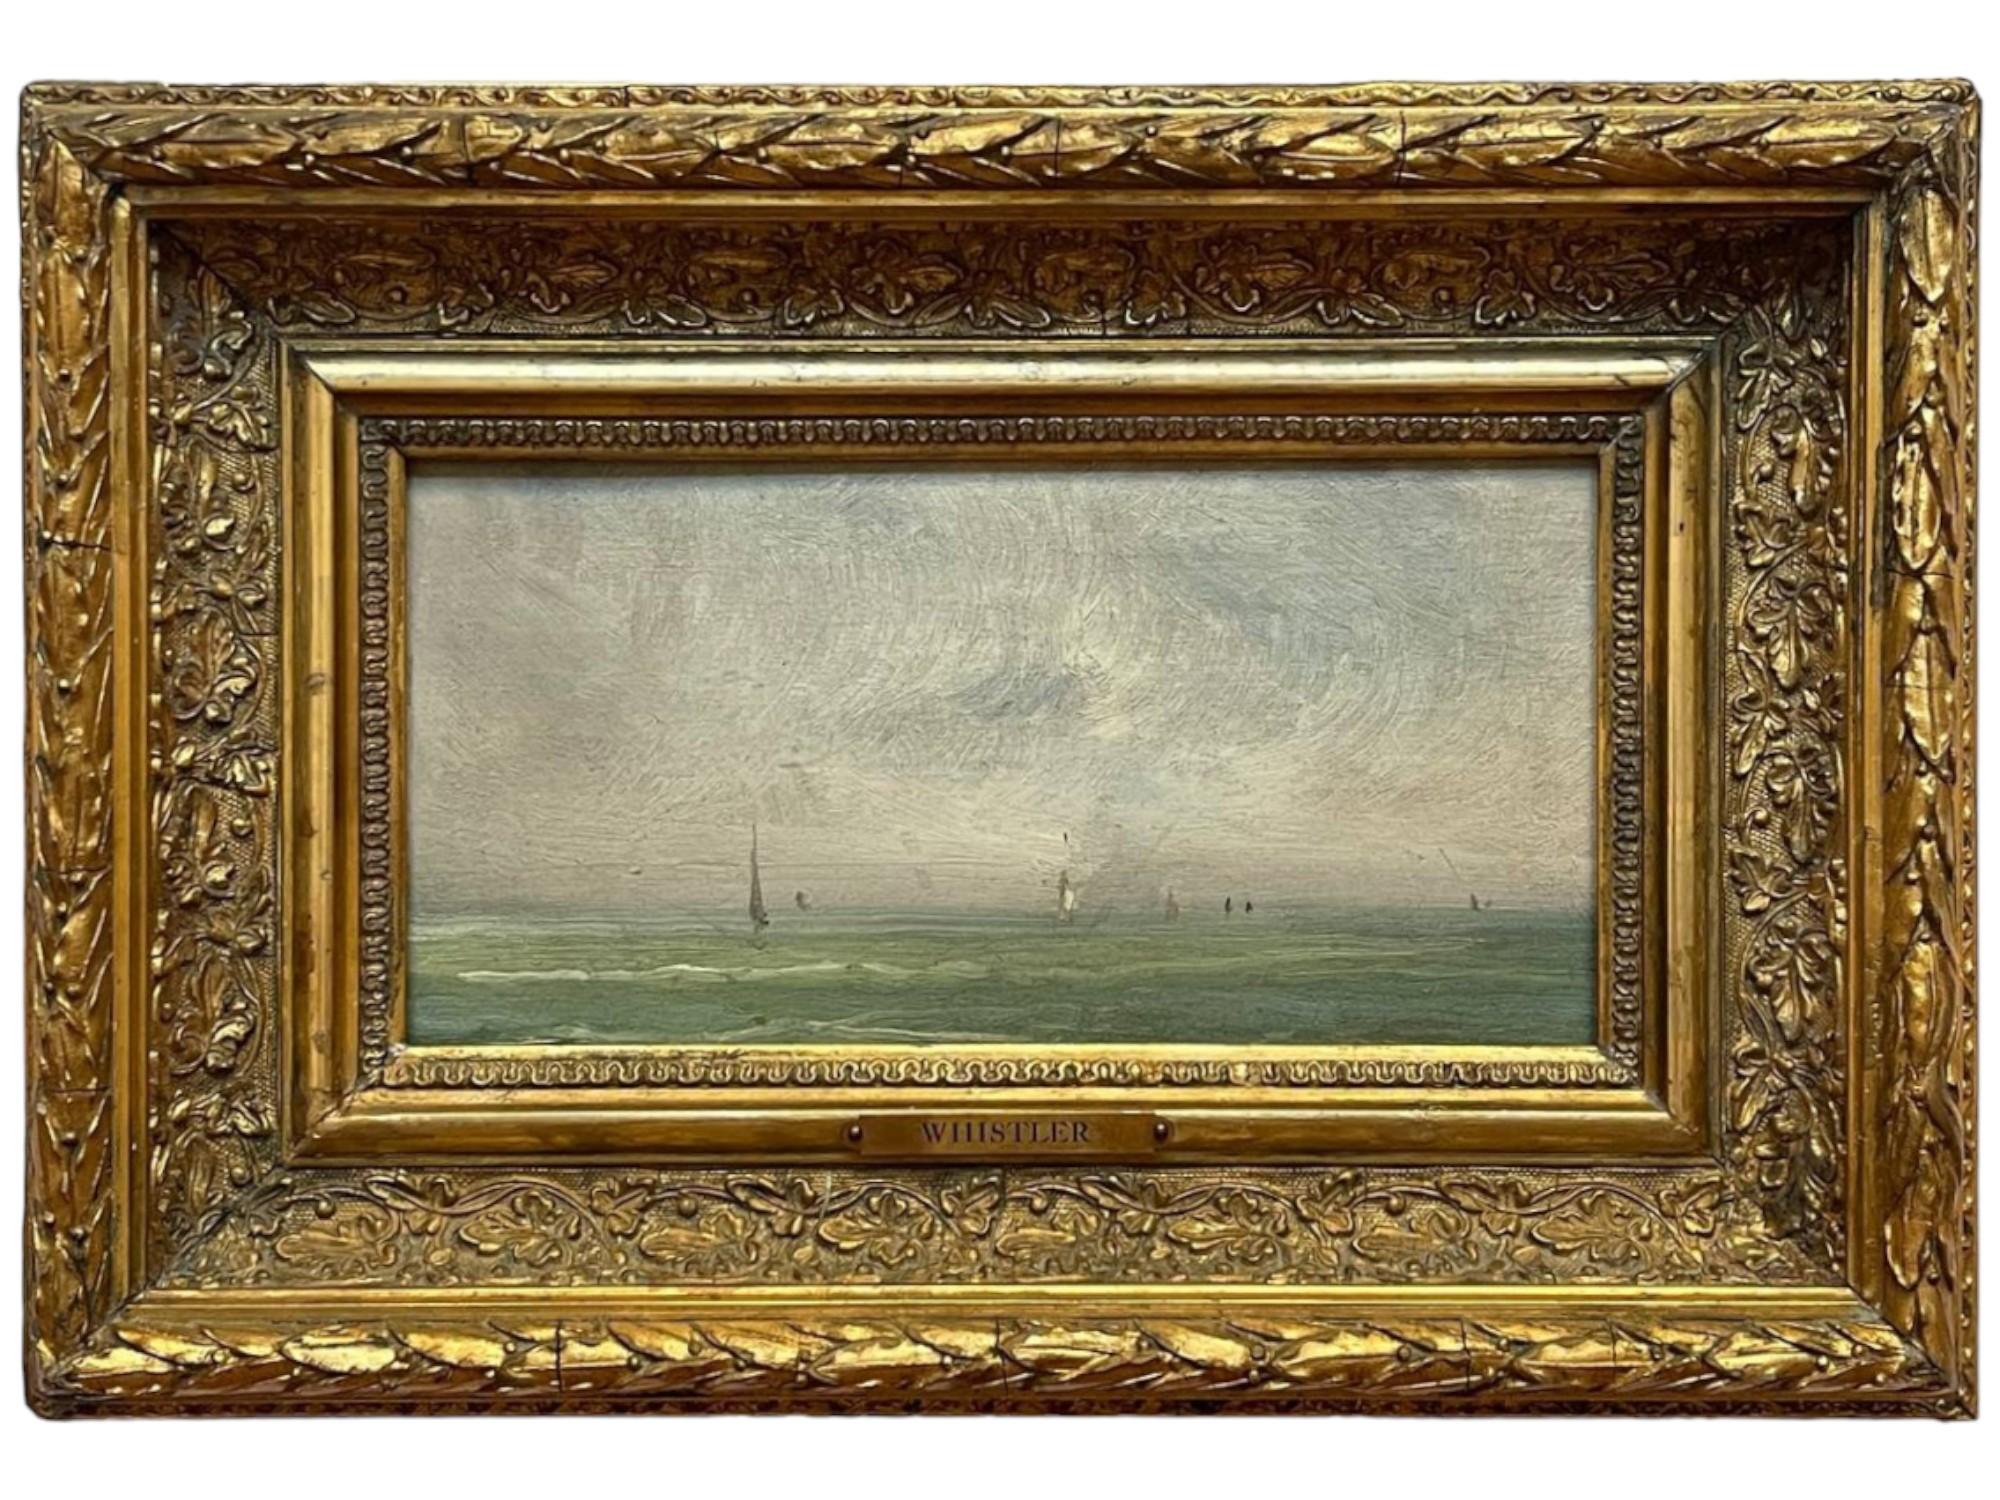 AMERICAN OIL PAINTING SEASCAPE BY JAMES WHISTLER PIC-0